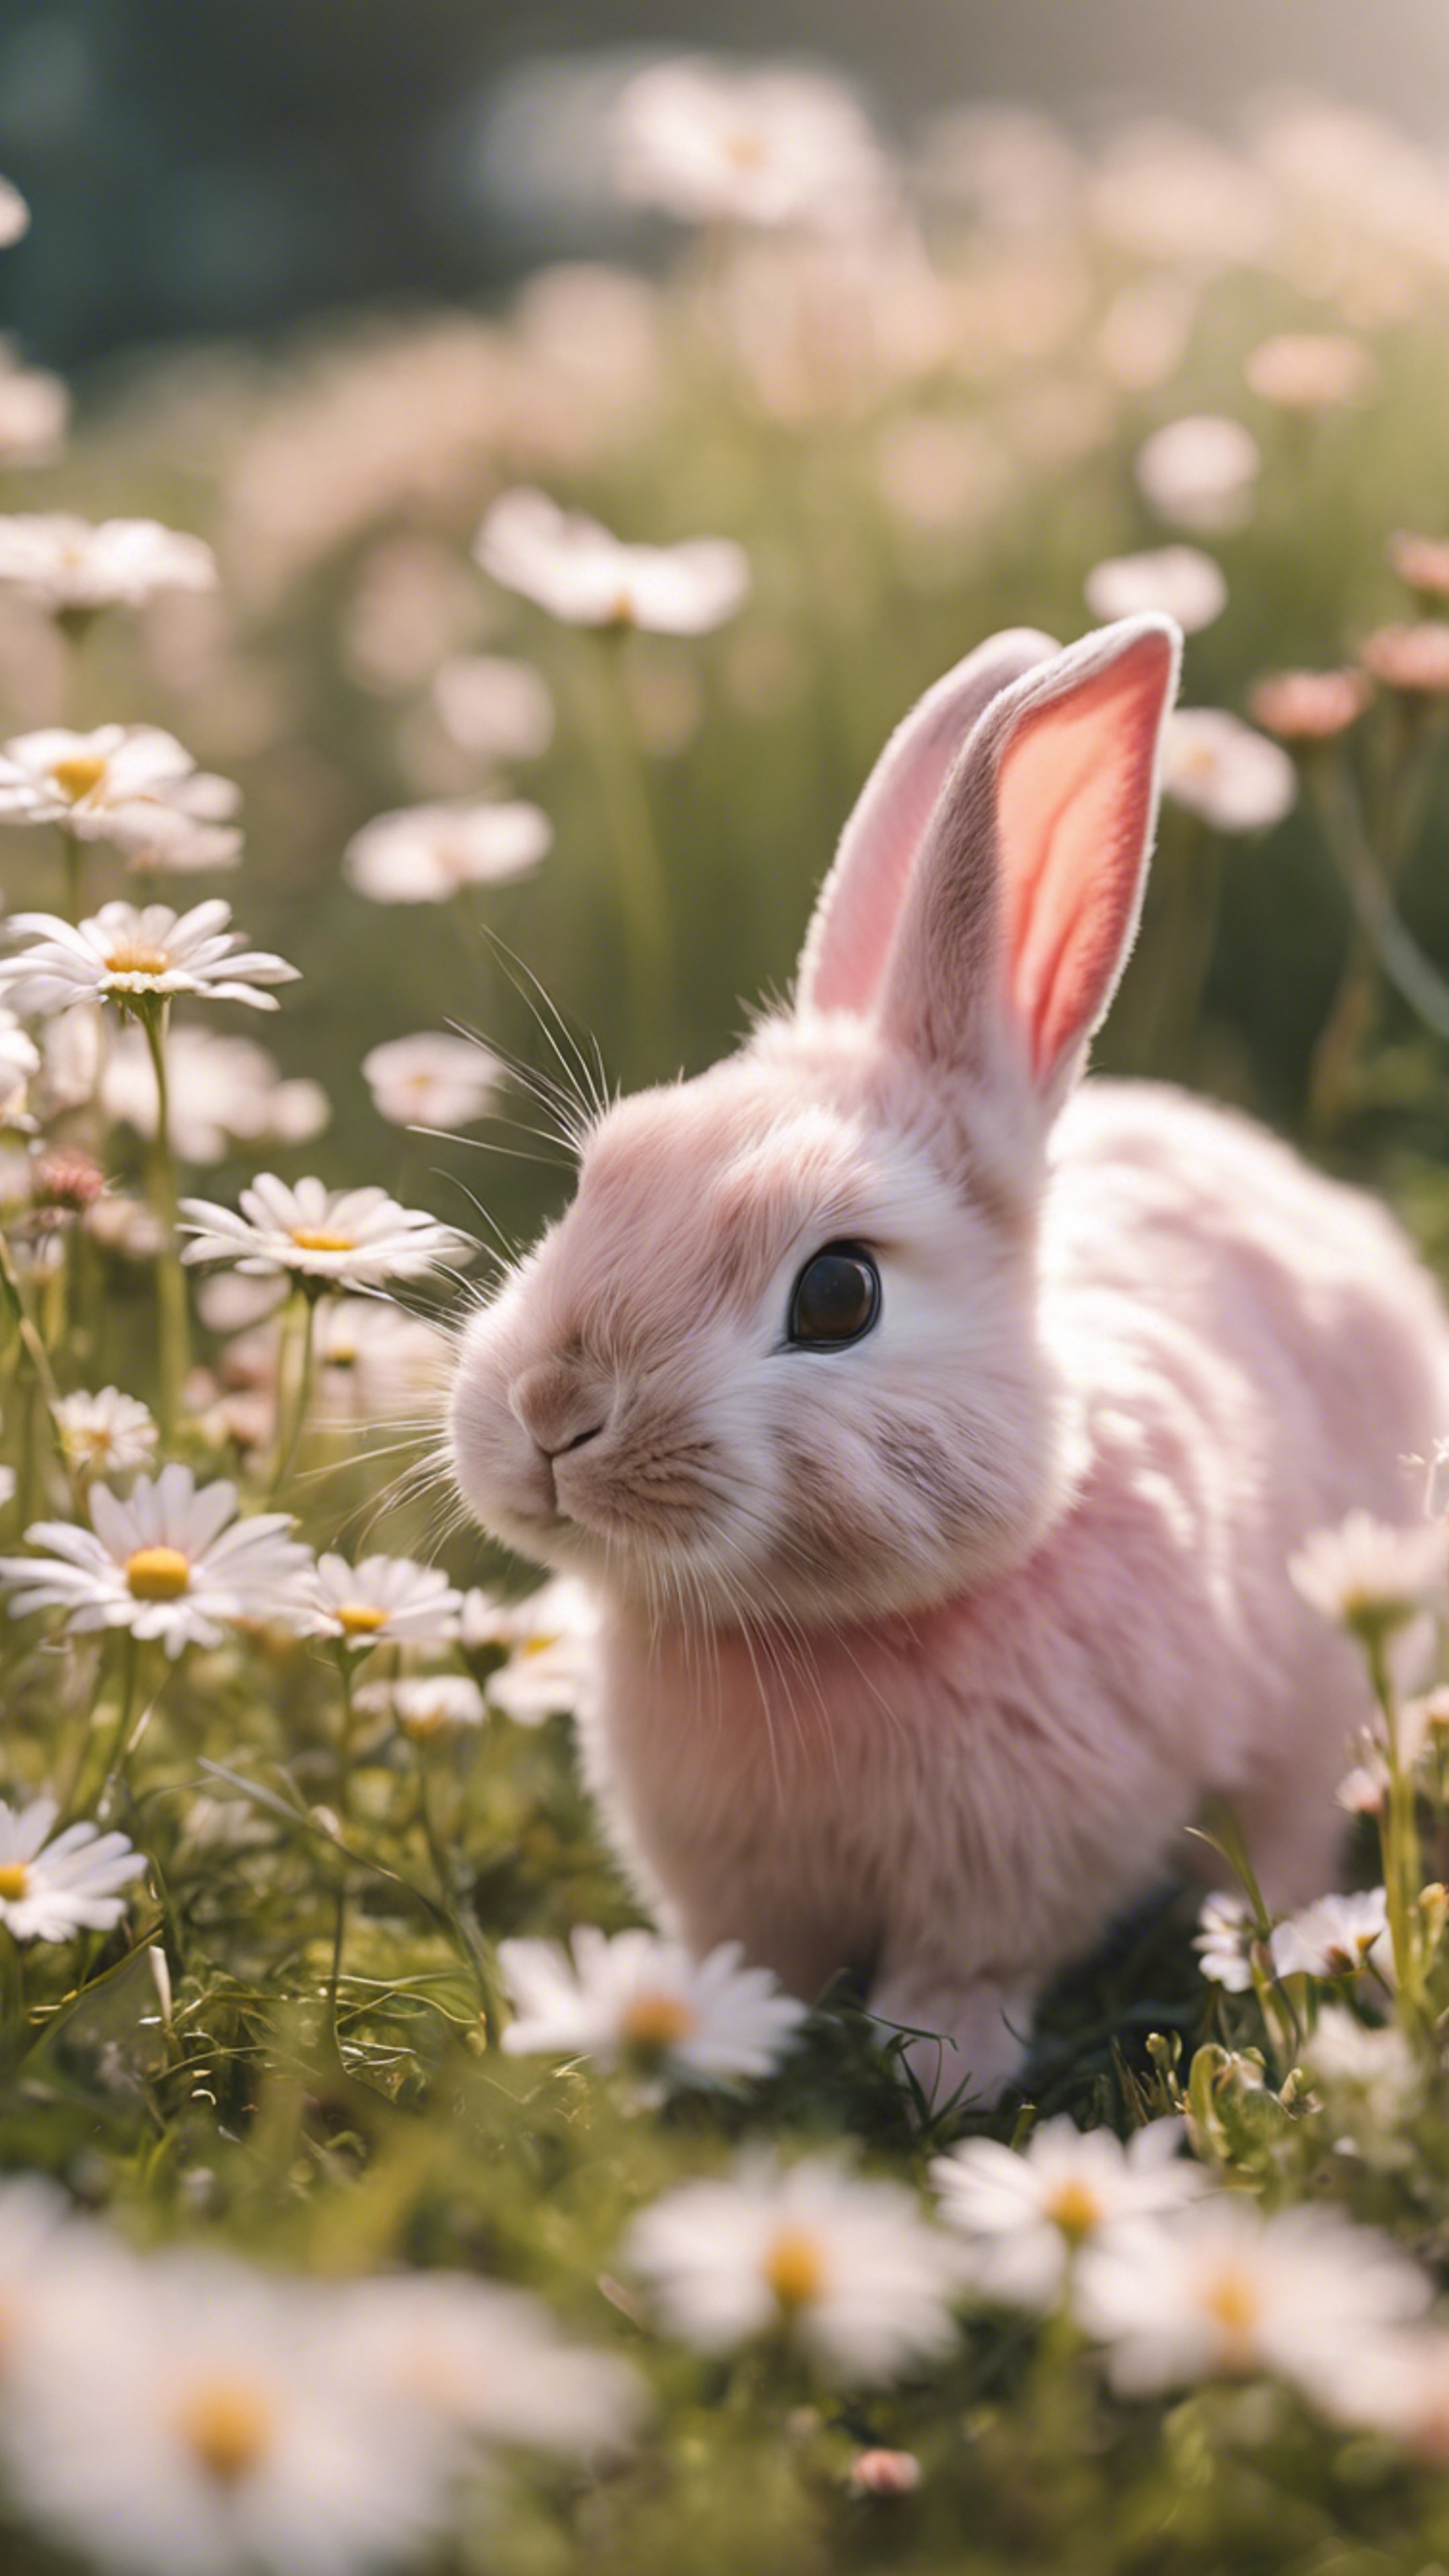 A pack of blush pink, Kawaii style rabbits happily playing in a field of daisies. Шпалери[cf36497c89454393a51d]